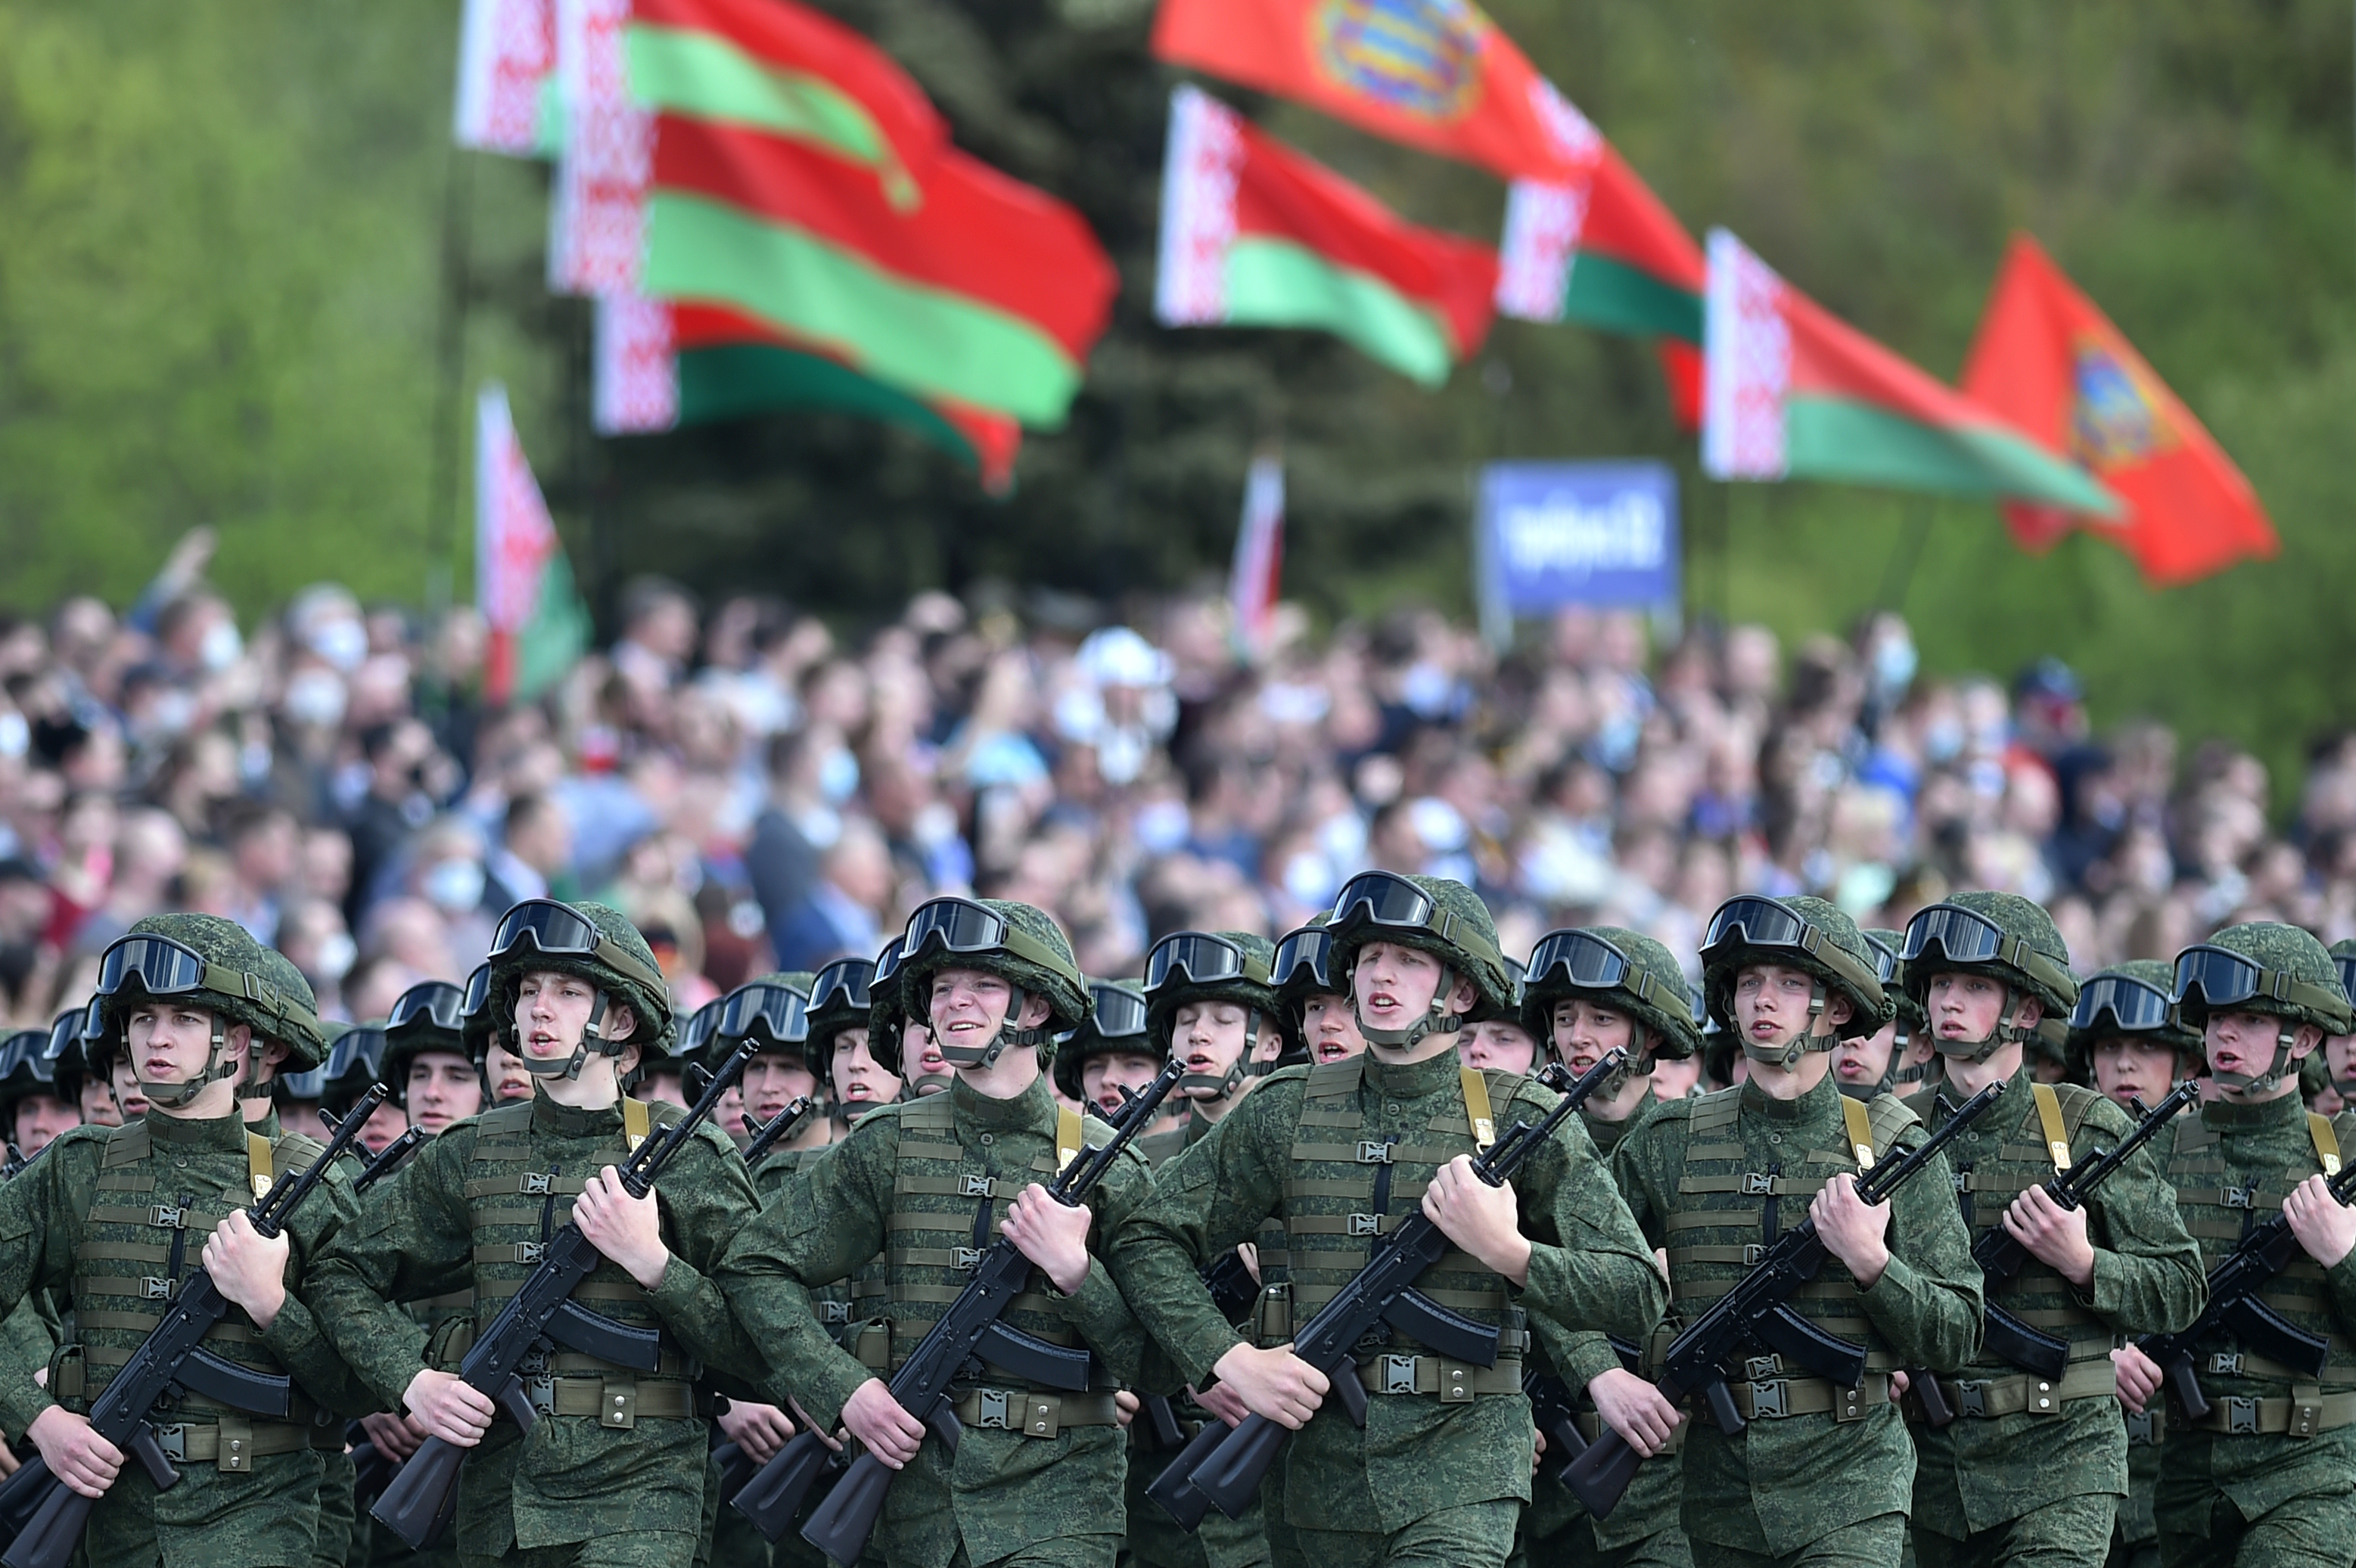 Belarusian servicemen march for the 75th anniversary of the end of World War II, as a crowd watches on with no social distancing measures in place.